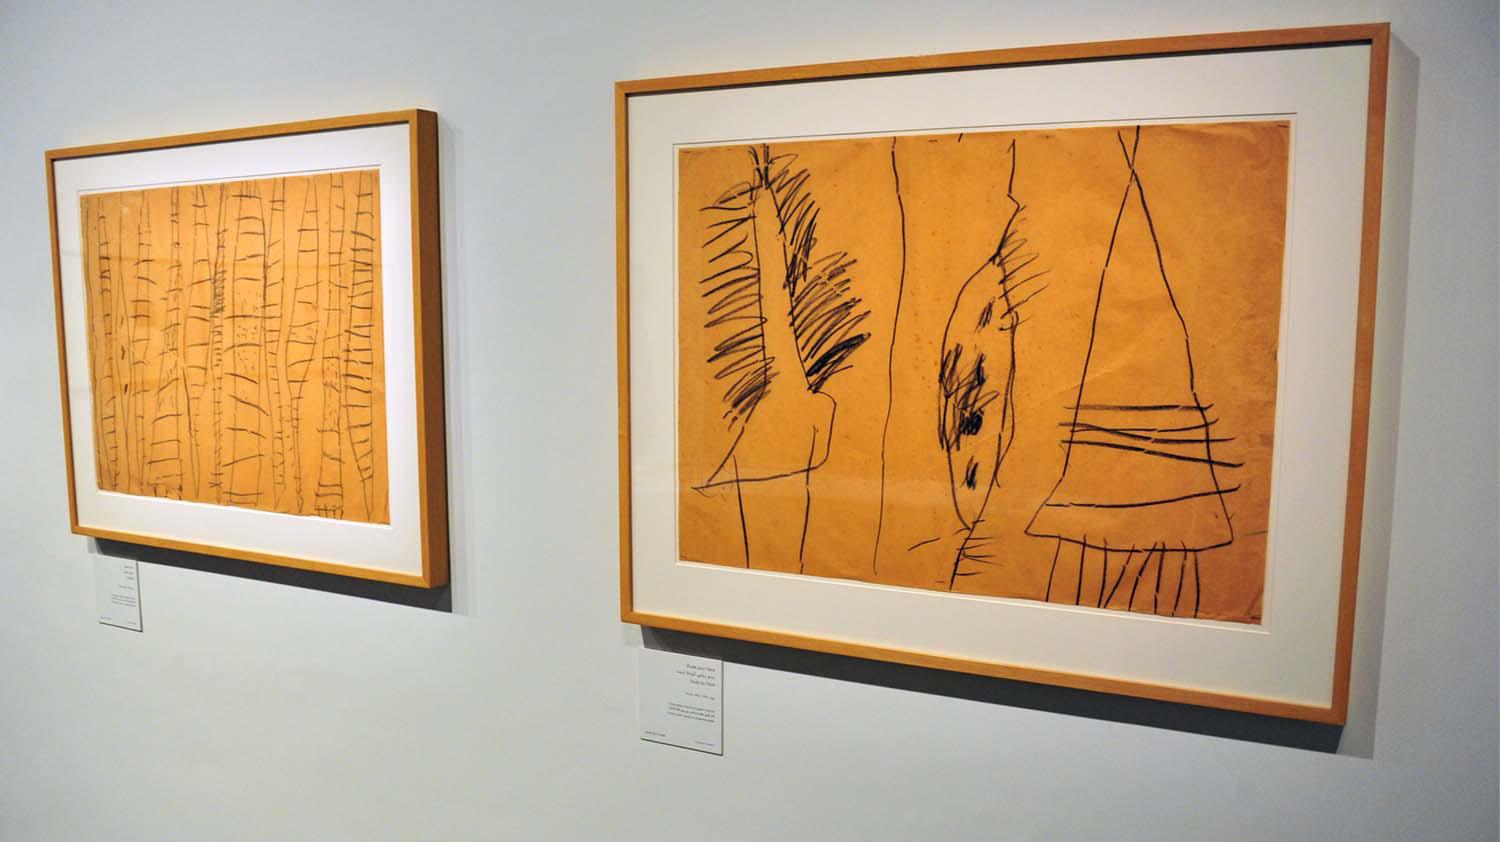 Cy Twombly was fascinated by Berber culture